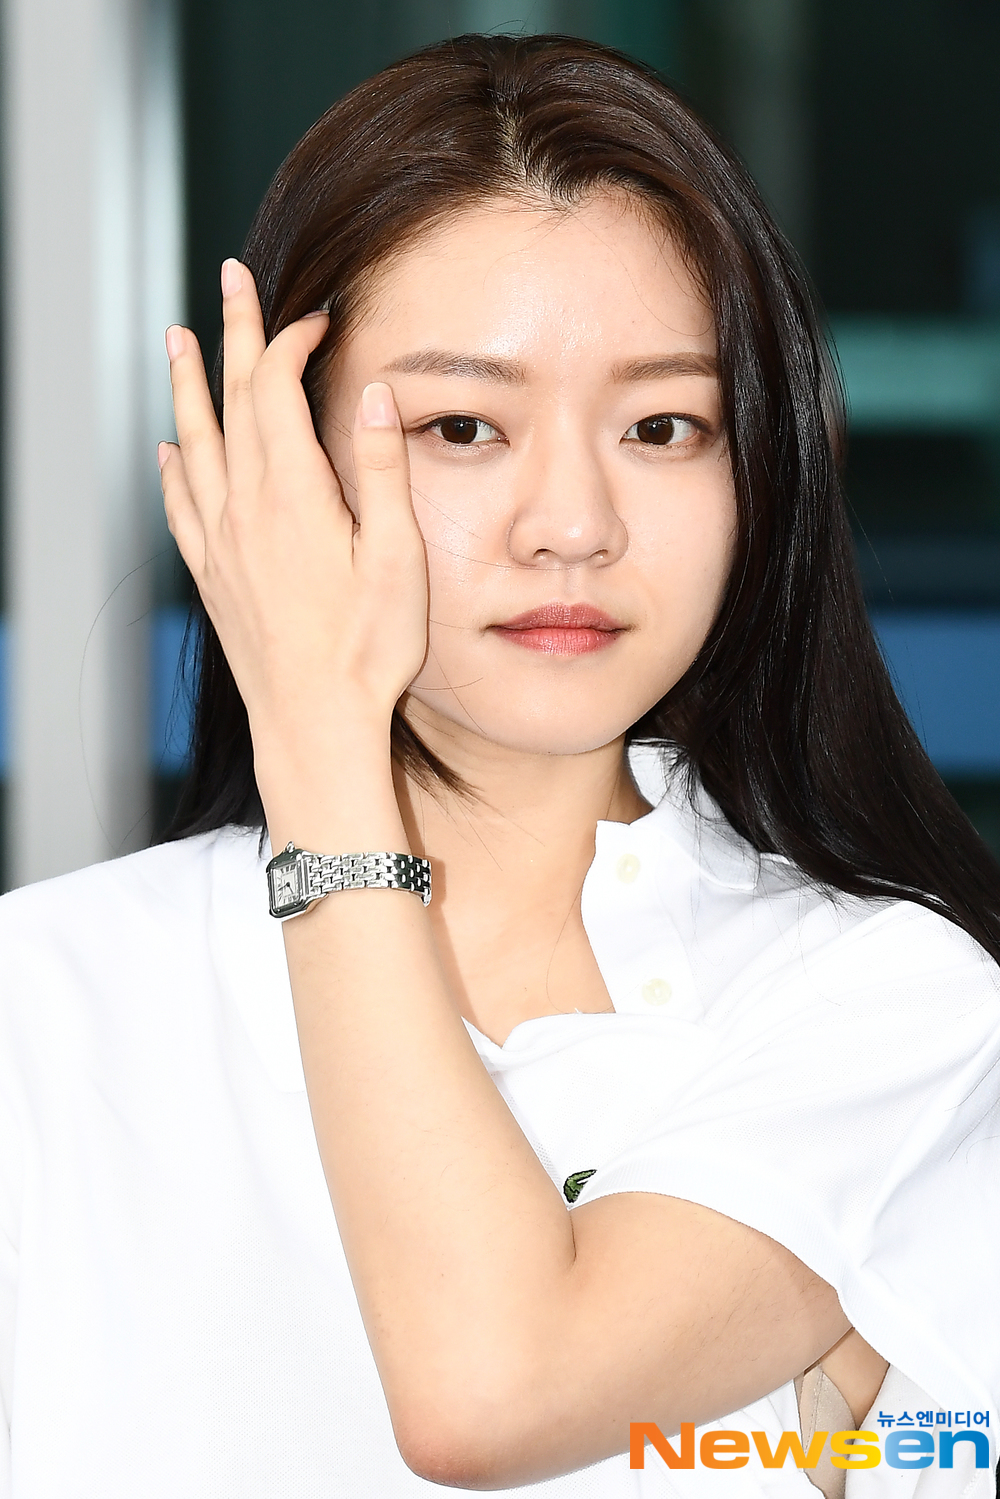 Actor Go Ah-sung left for the magazine photo shoot Vietnam Pukuok on April 26 at the Incheon International Airport in Unseo-dong, Jung-gu, Incheon.Actor Go Ah-sung is leaving for Vietnam Pukuok with an airport fashion.exponential earthquake